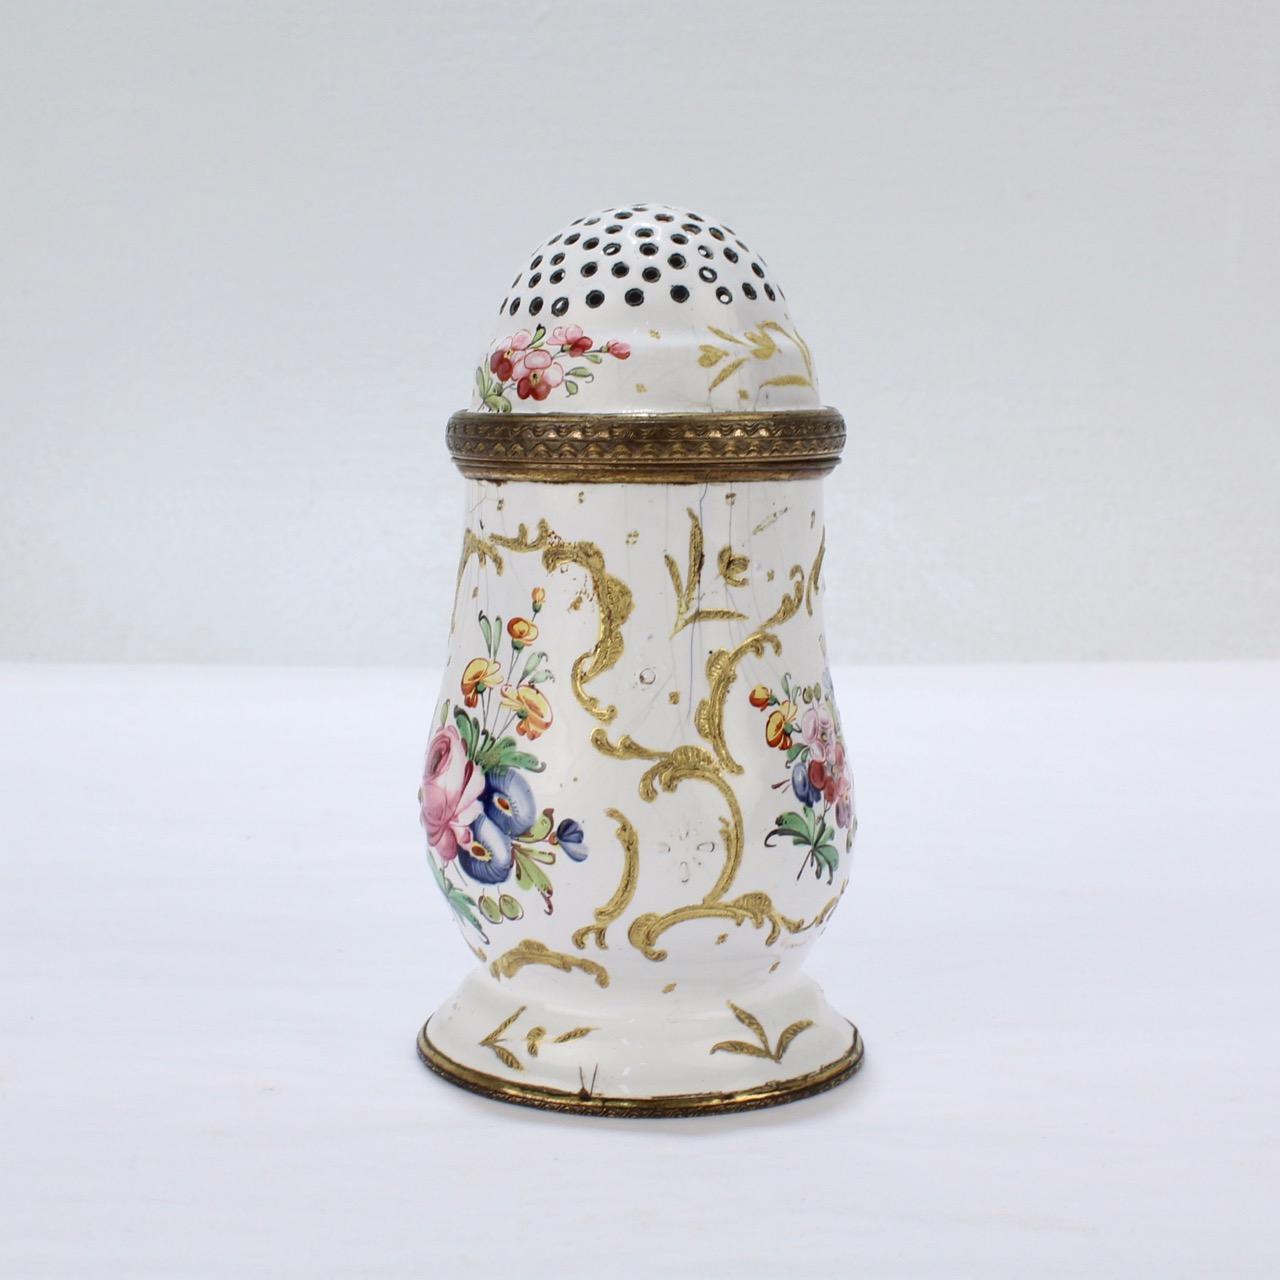 An antique 18th century Bilston or Battersea enamel muffineer or sugar shaker.

A very rare form!

With a pierced, domed top, raised gold decoration, and cartouches of floral sprays.

Measure: Height ca. 3 7/8 in.

Items purchased from this